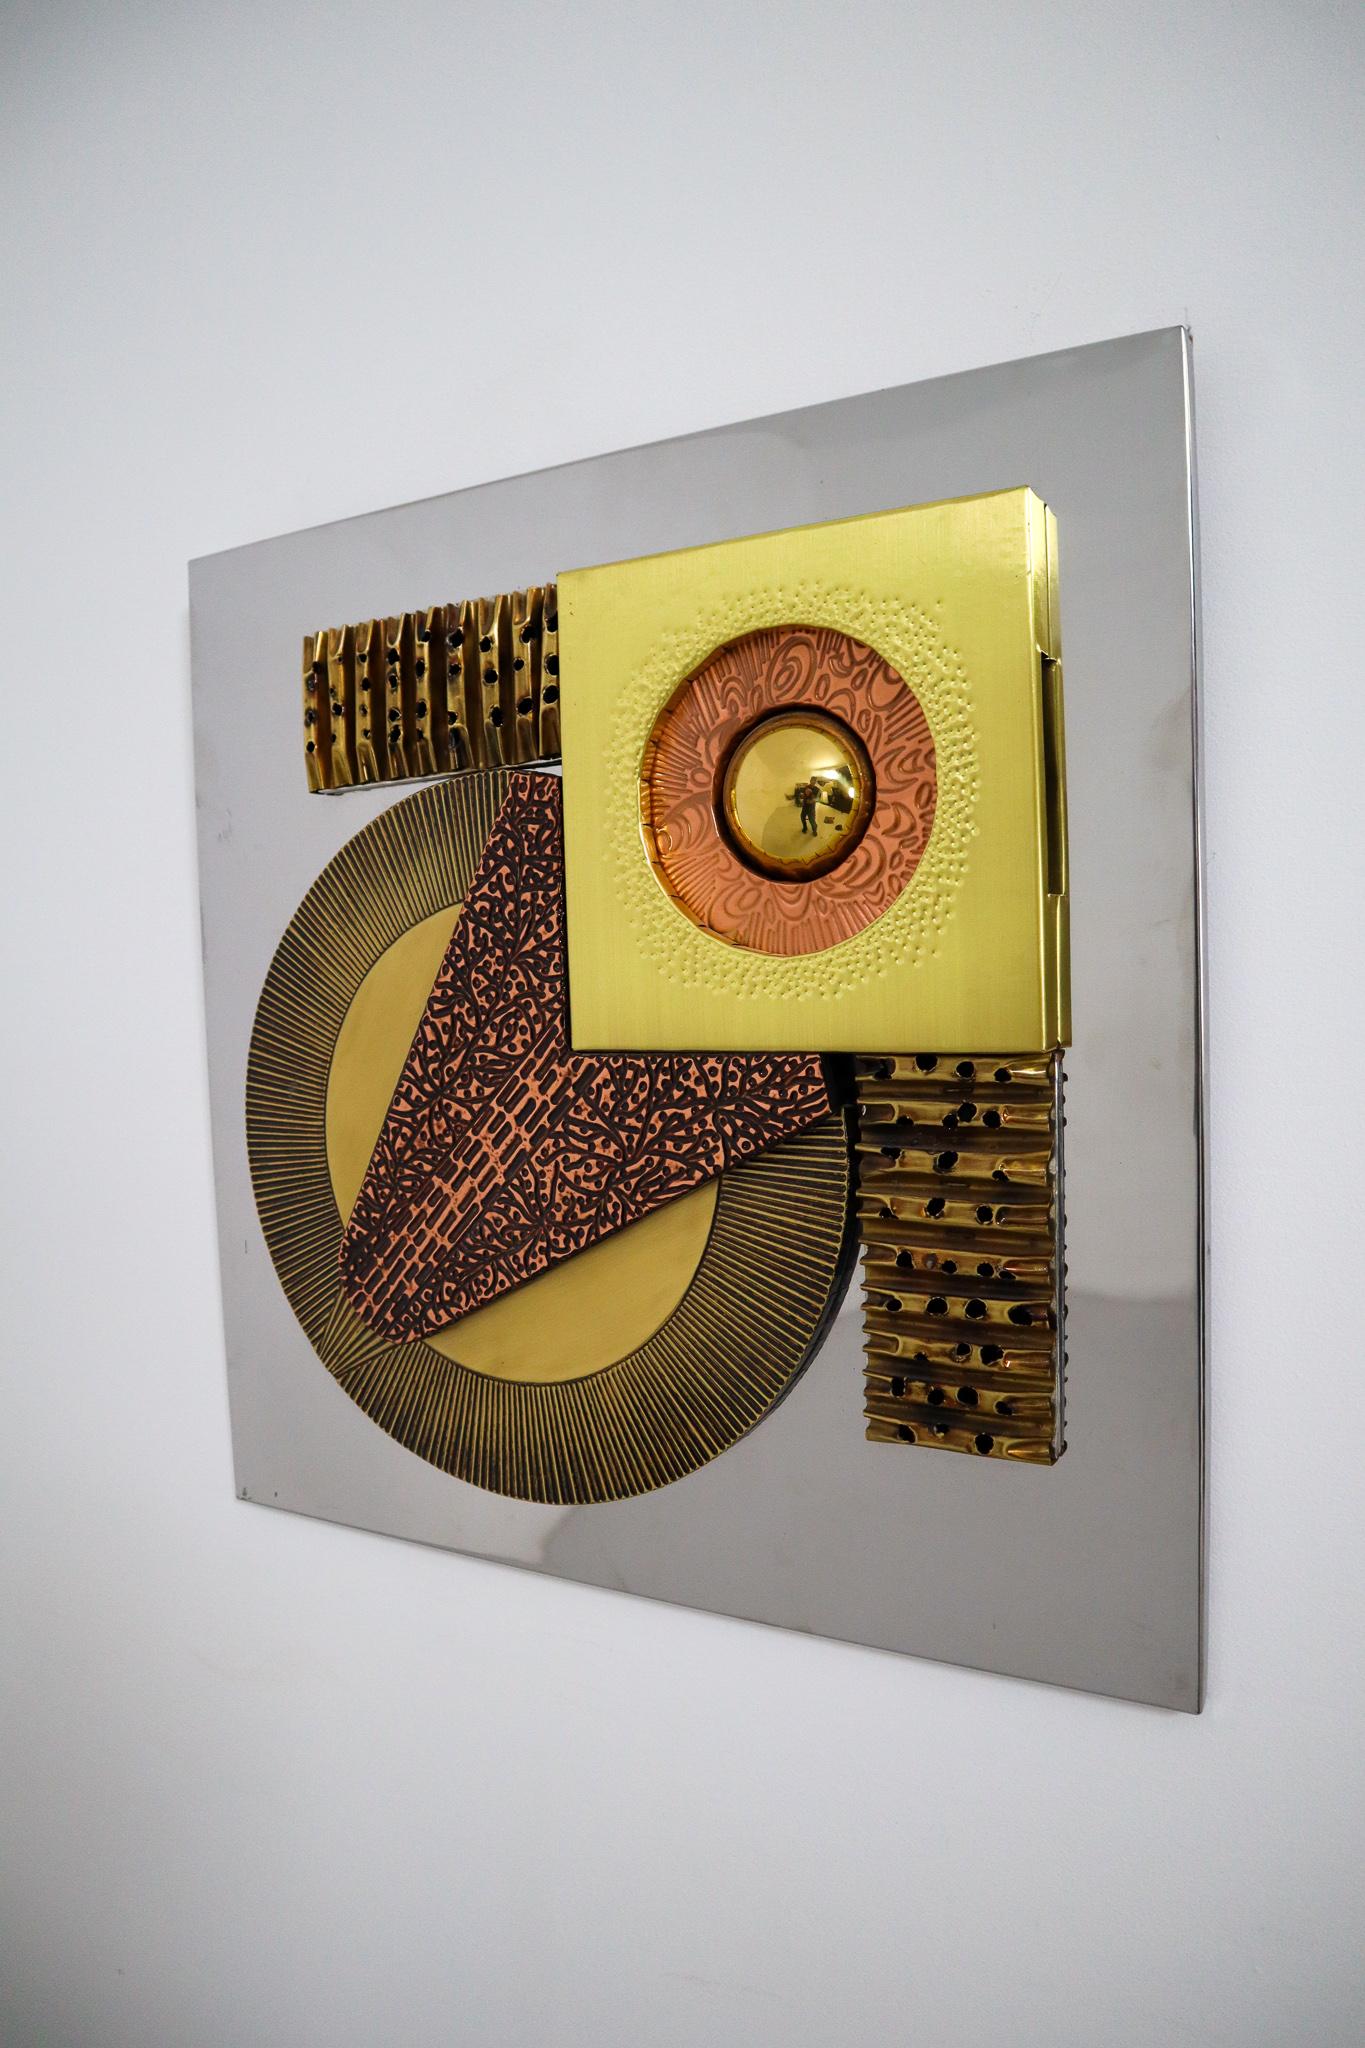 This brutalist wall sculpture is inspired and in the style of sculptor Paul Avans made approximately 1970, Europe . This abstract wall sculpture consist of tortured copper and brass in abstract shapes. The wall sculpture is affixed to a wood board